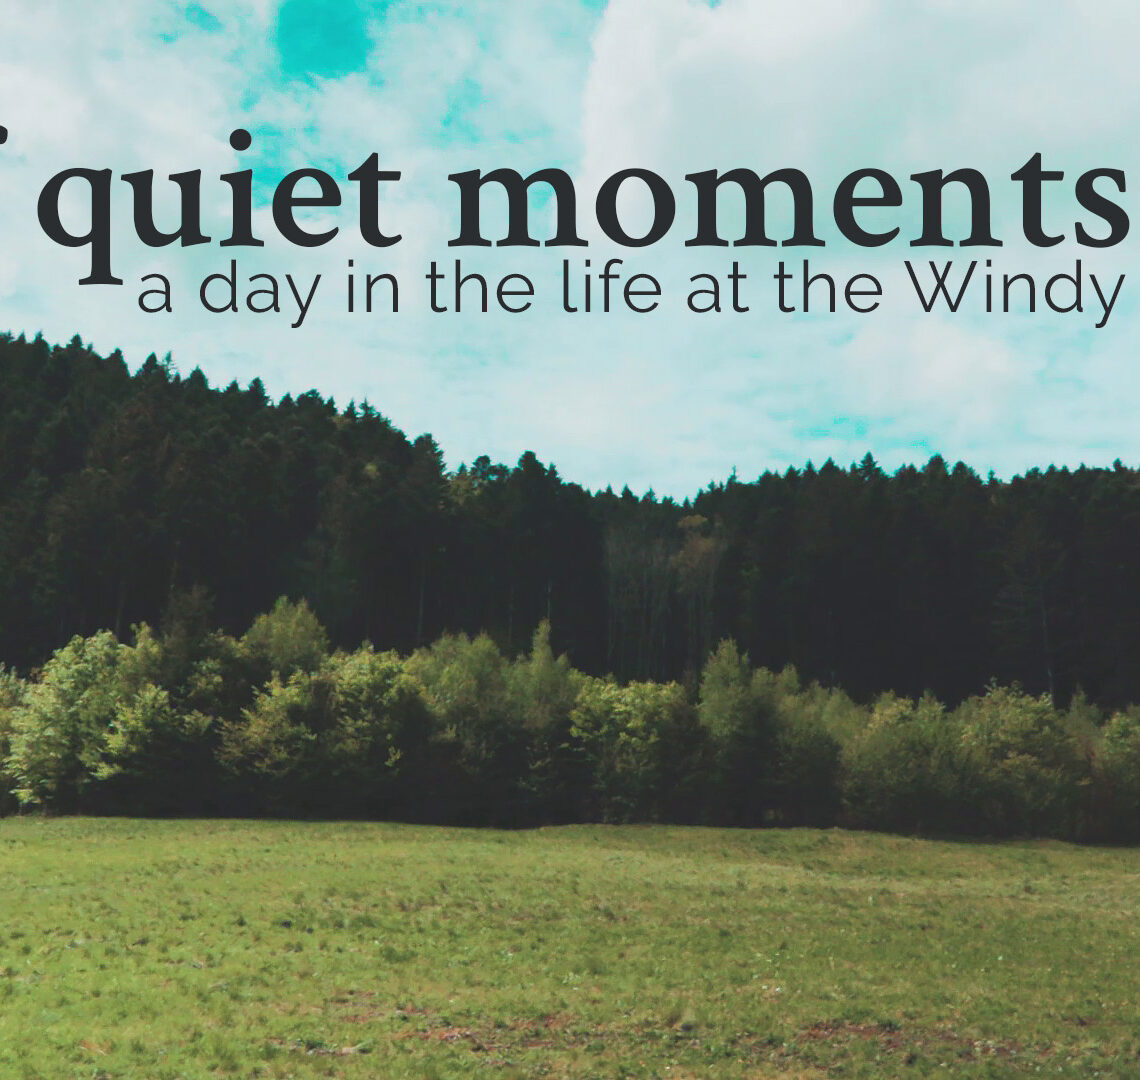 Of quiet moments - a day in the life at The Windy Burrow